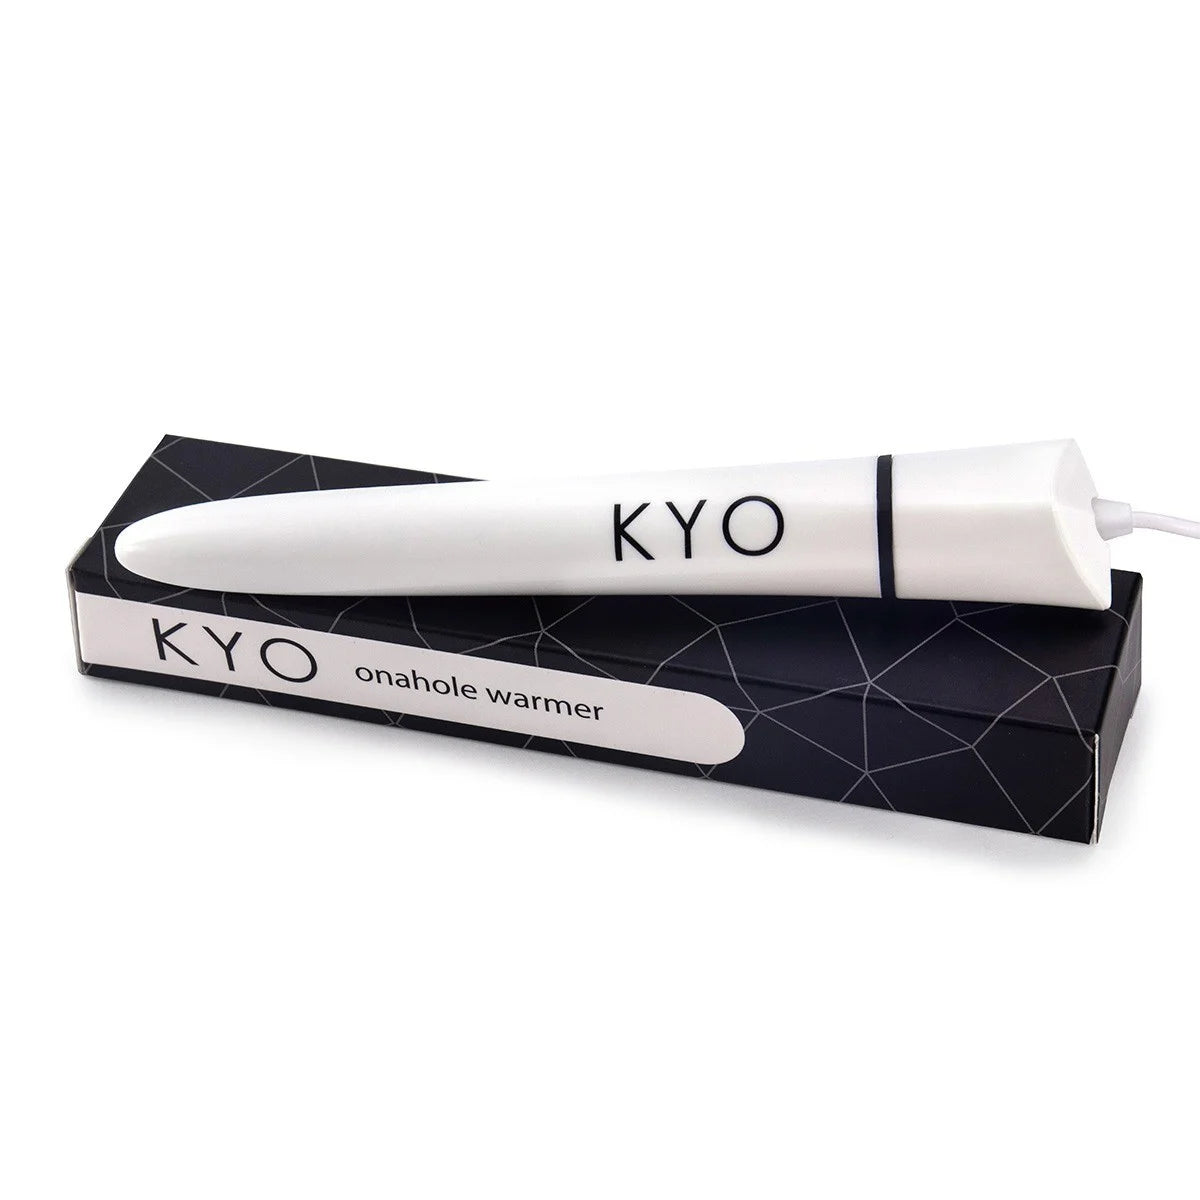 KYO Onahole Warmer - Faster, Safer, and Easier than Alternatives